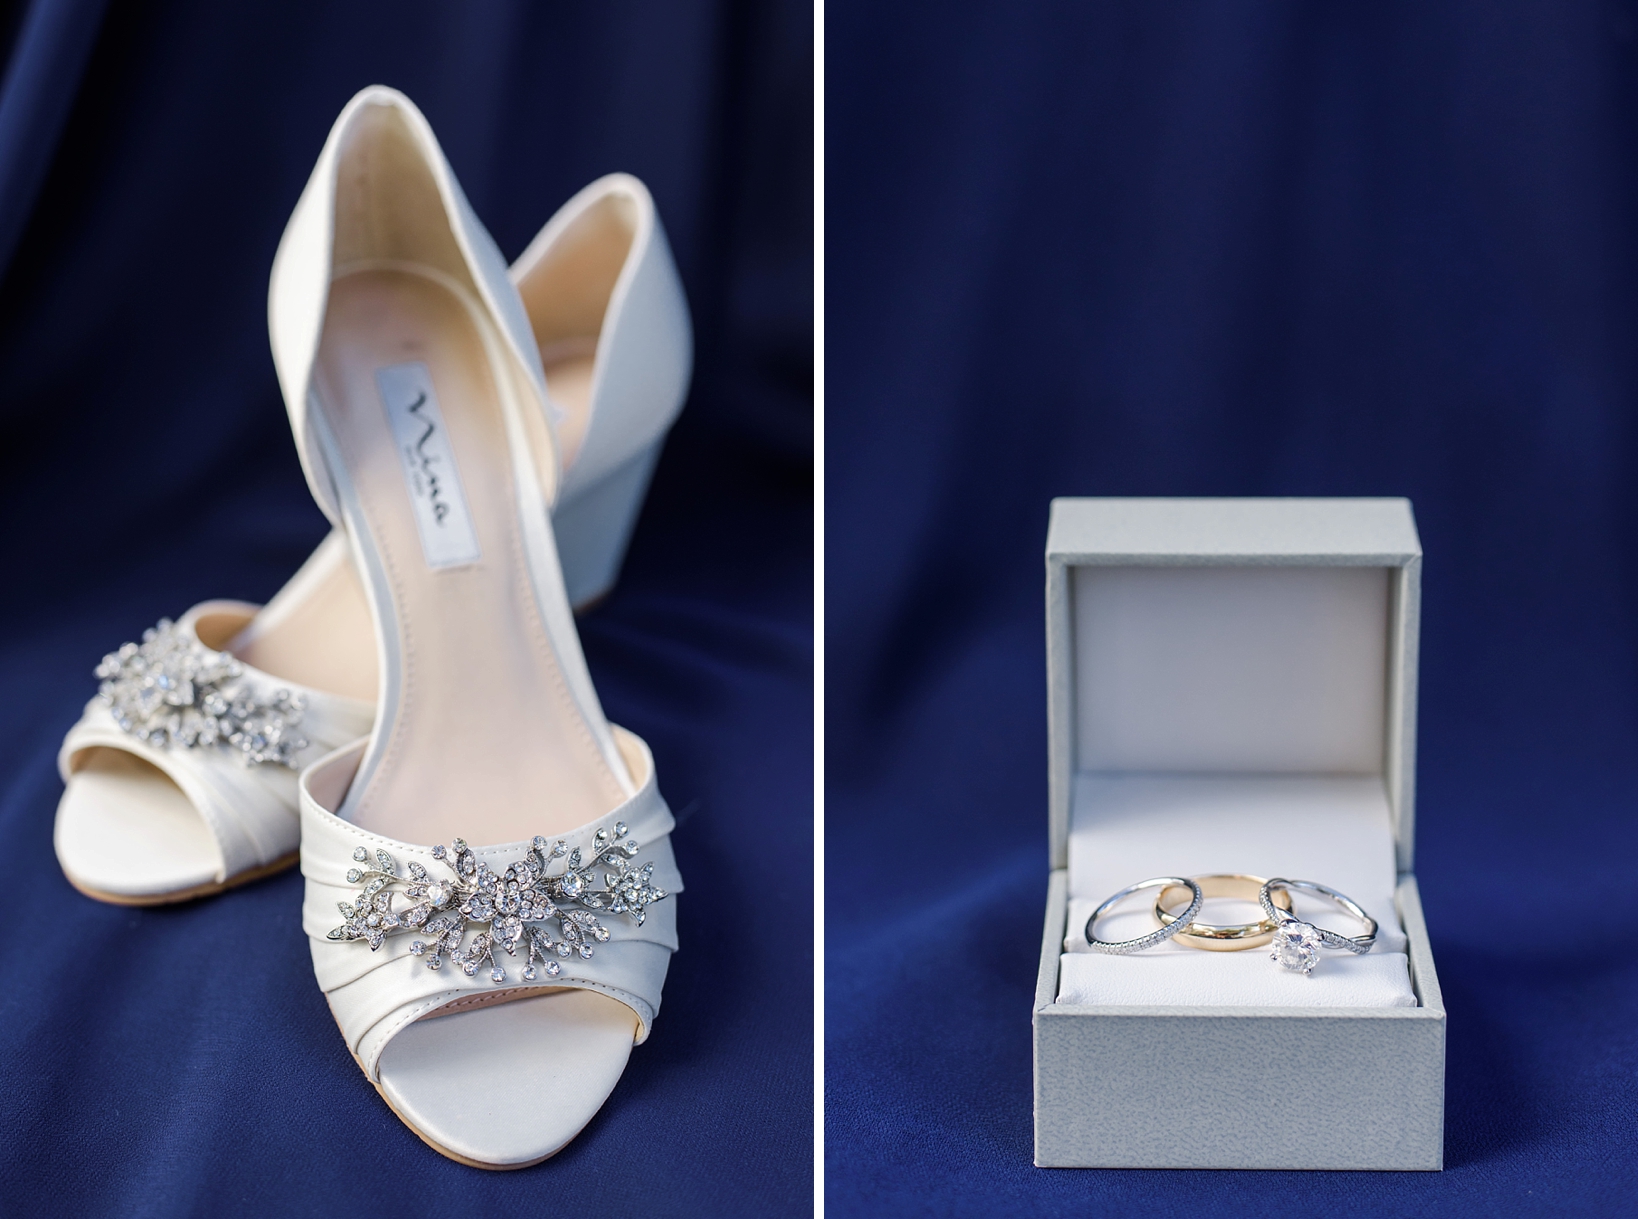 Wedding shoes with jewels and a shot of the wedding rings in a box